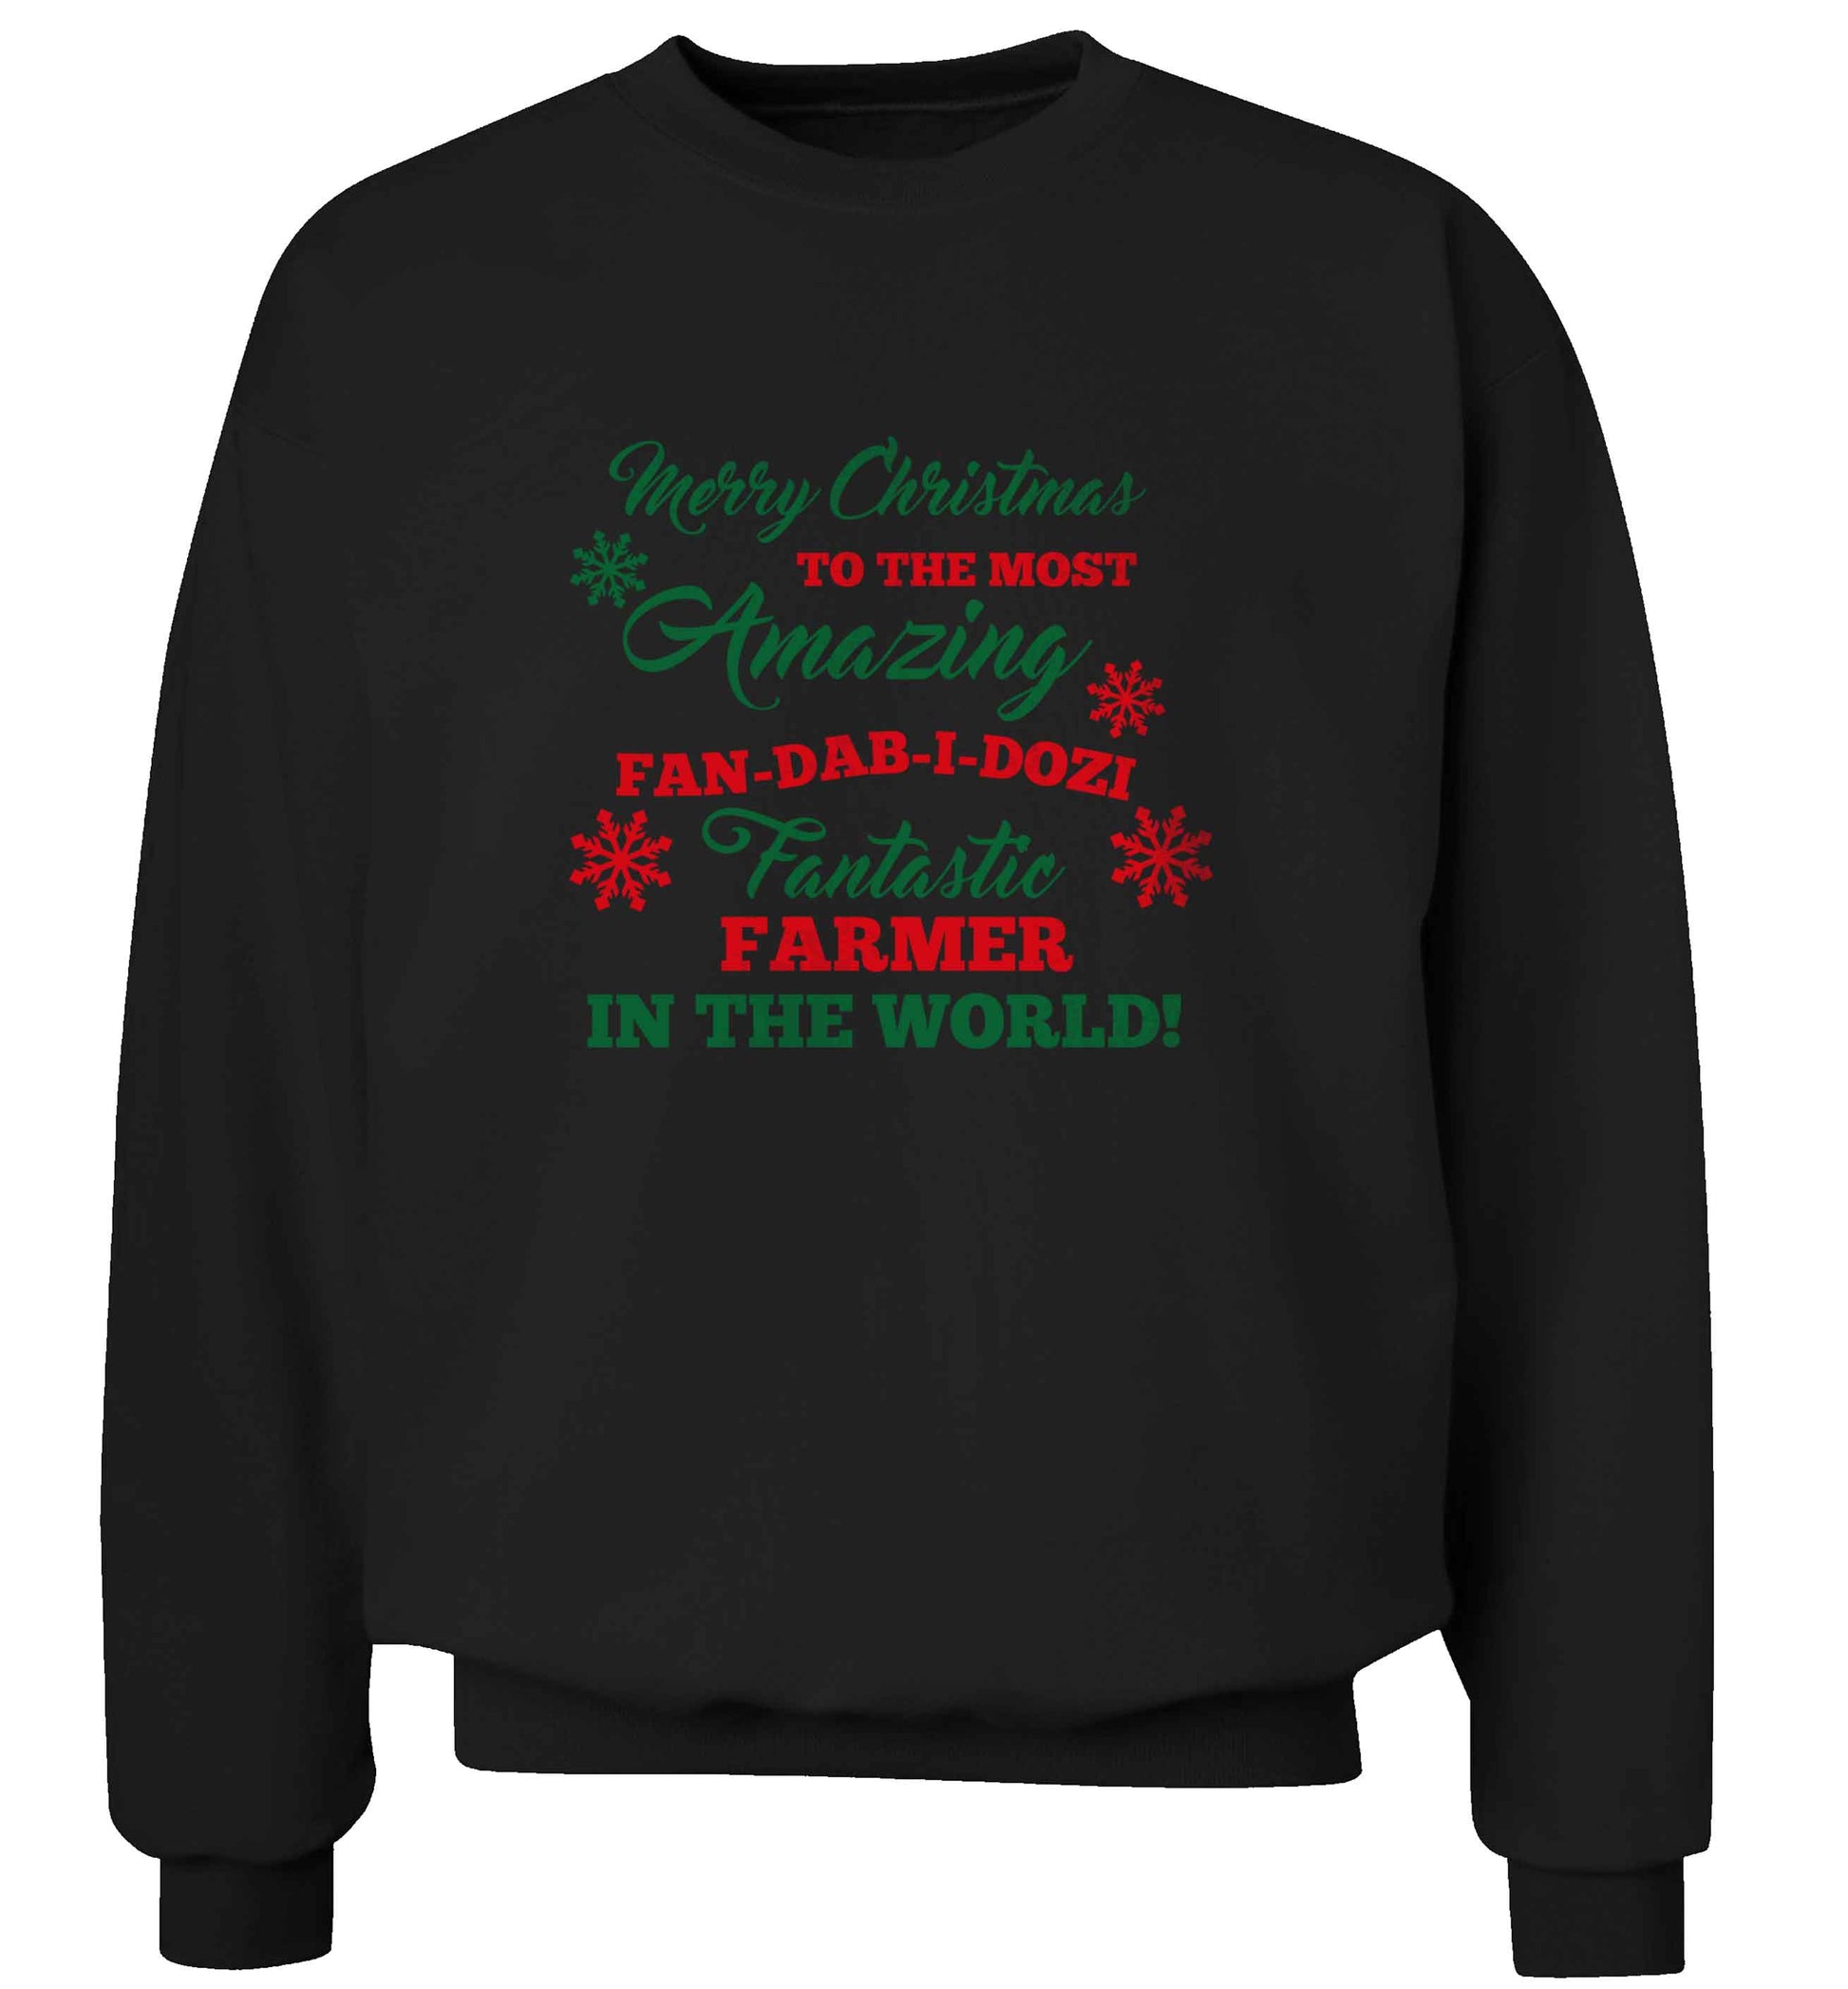 Merry Christmas to the most amazing farmer in the world! adult's unisex black sweater 2XL